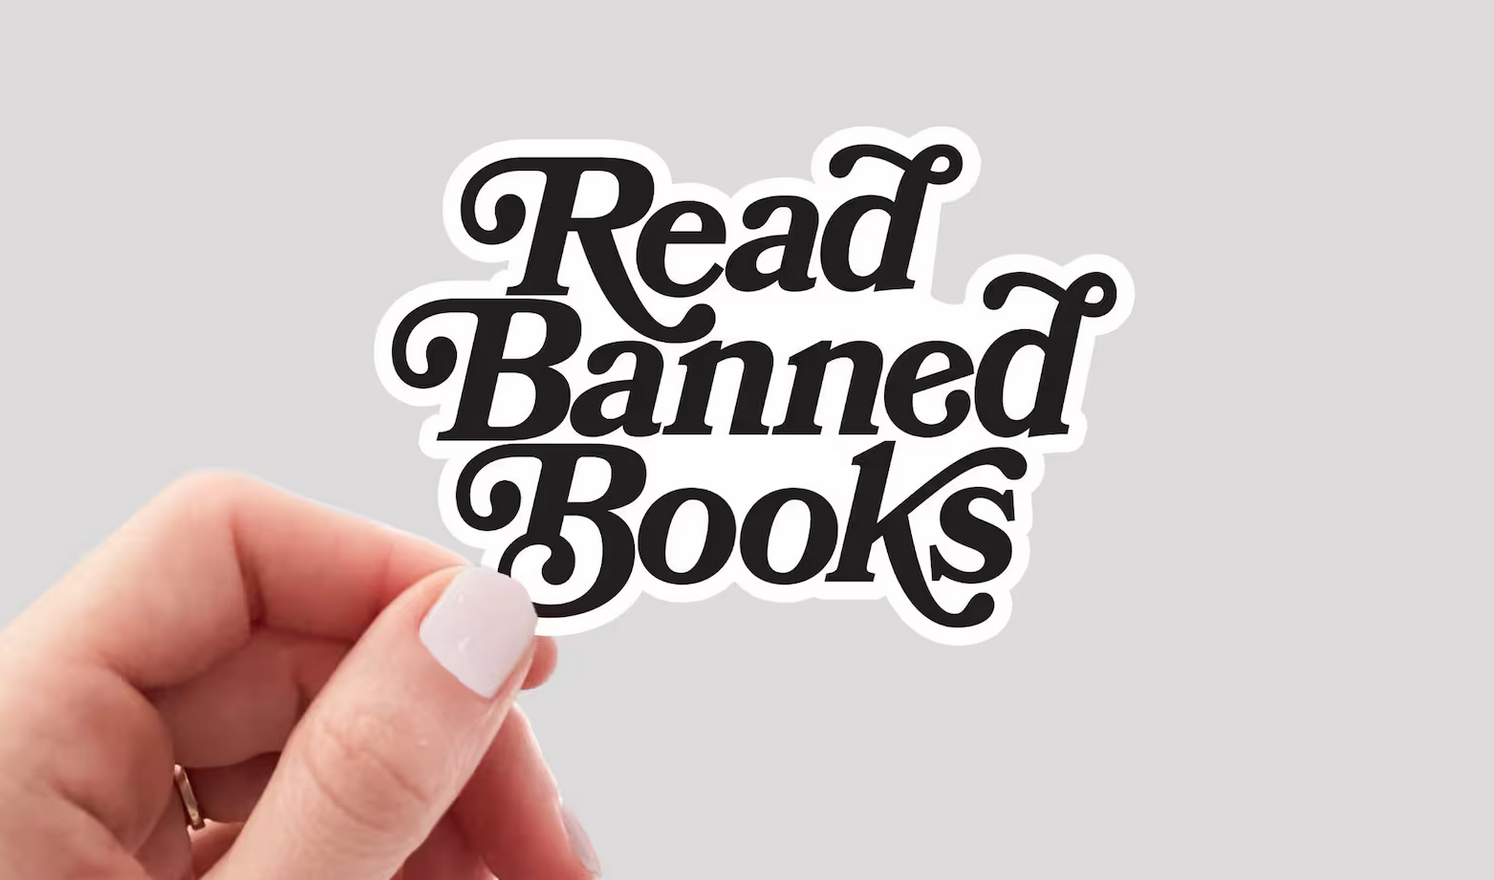 white sticker with black text saying "read banned books"